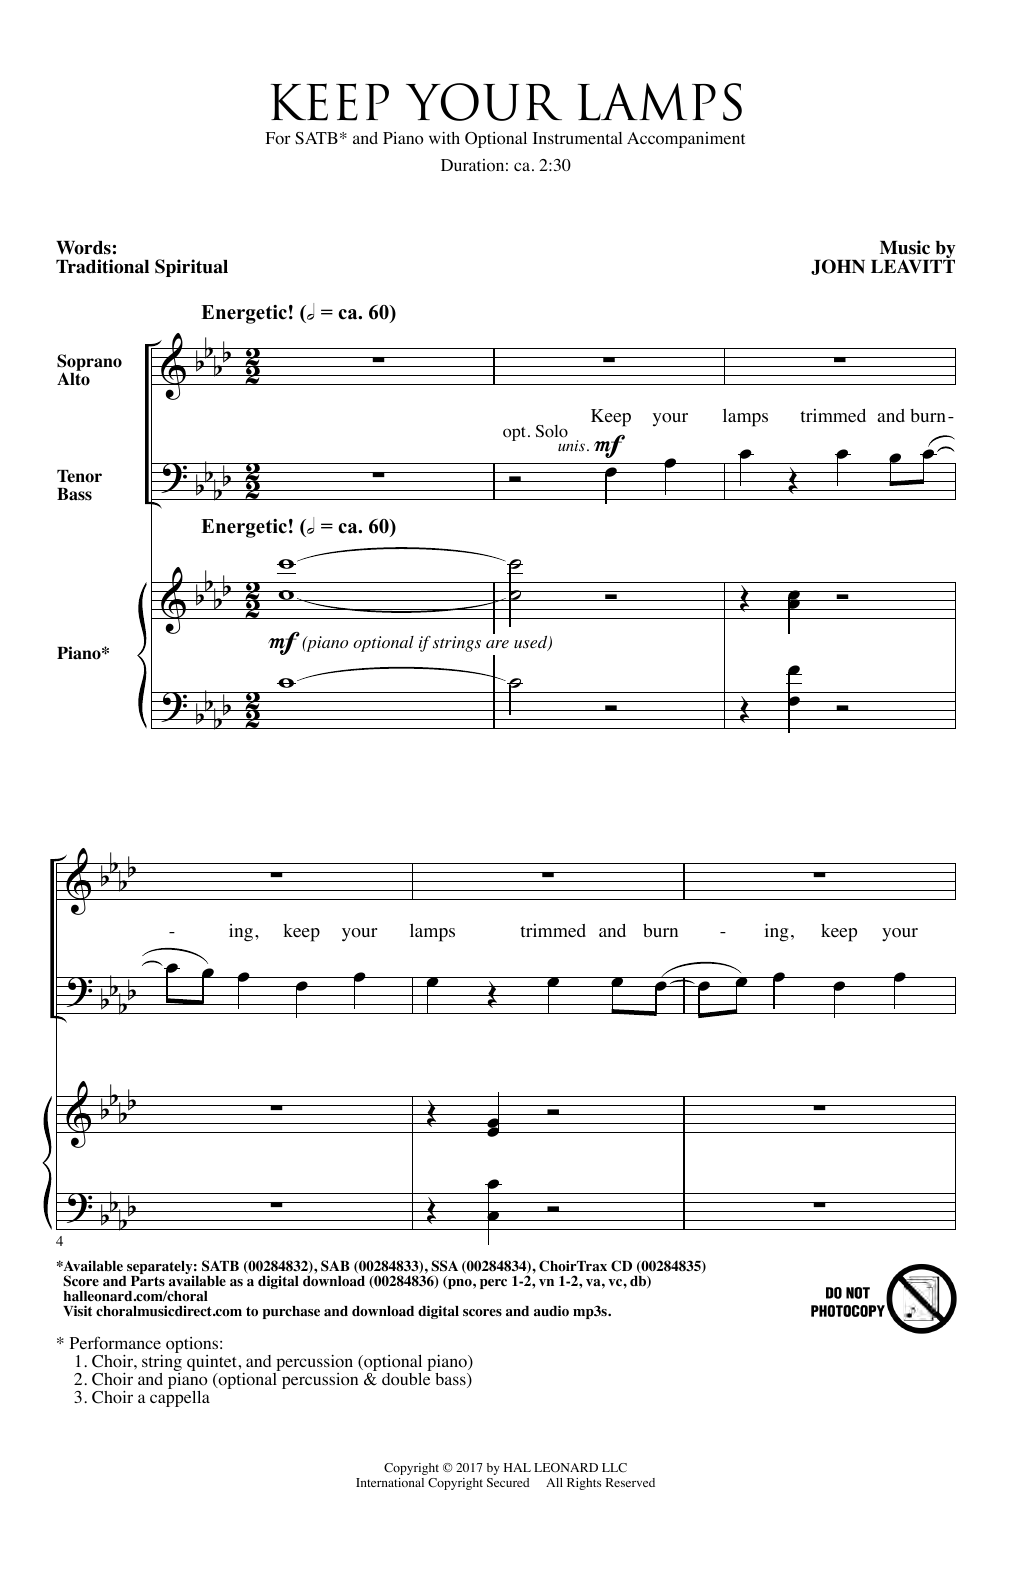 Download John Leavitt Keep Your Lamps Trimmed And Burning Sheet Music